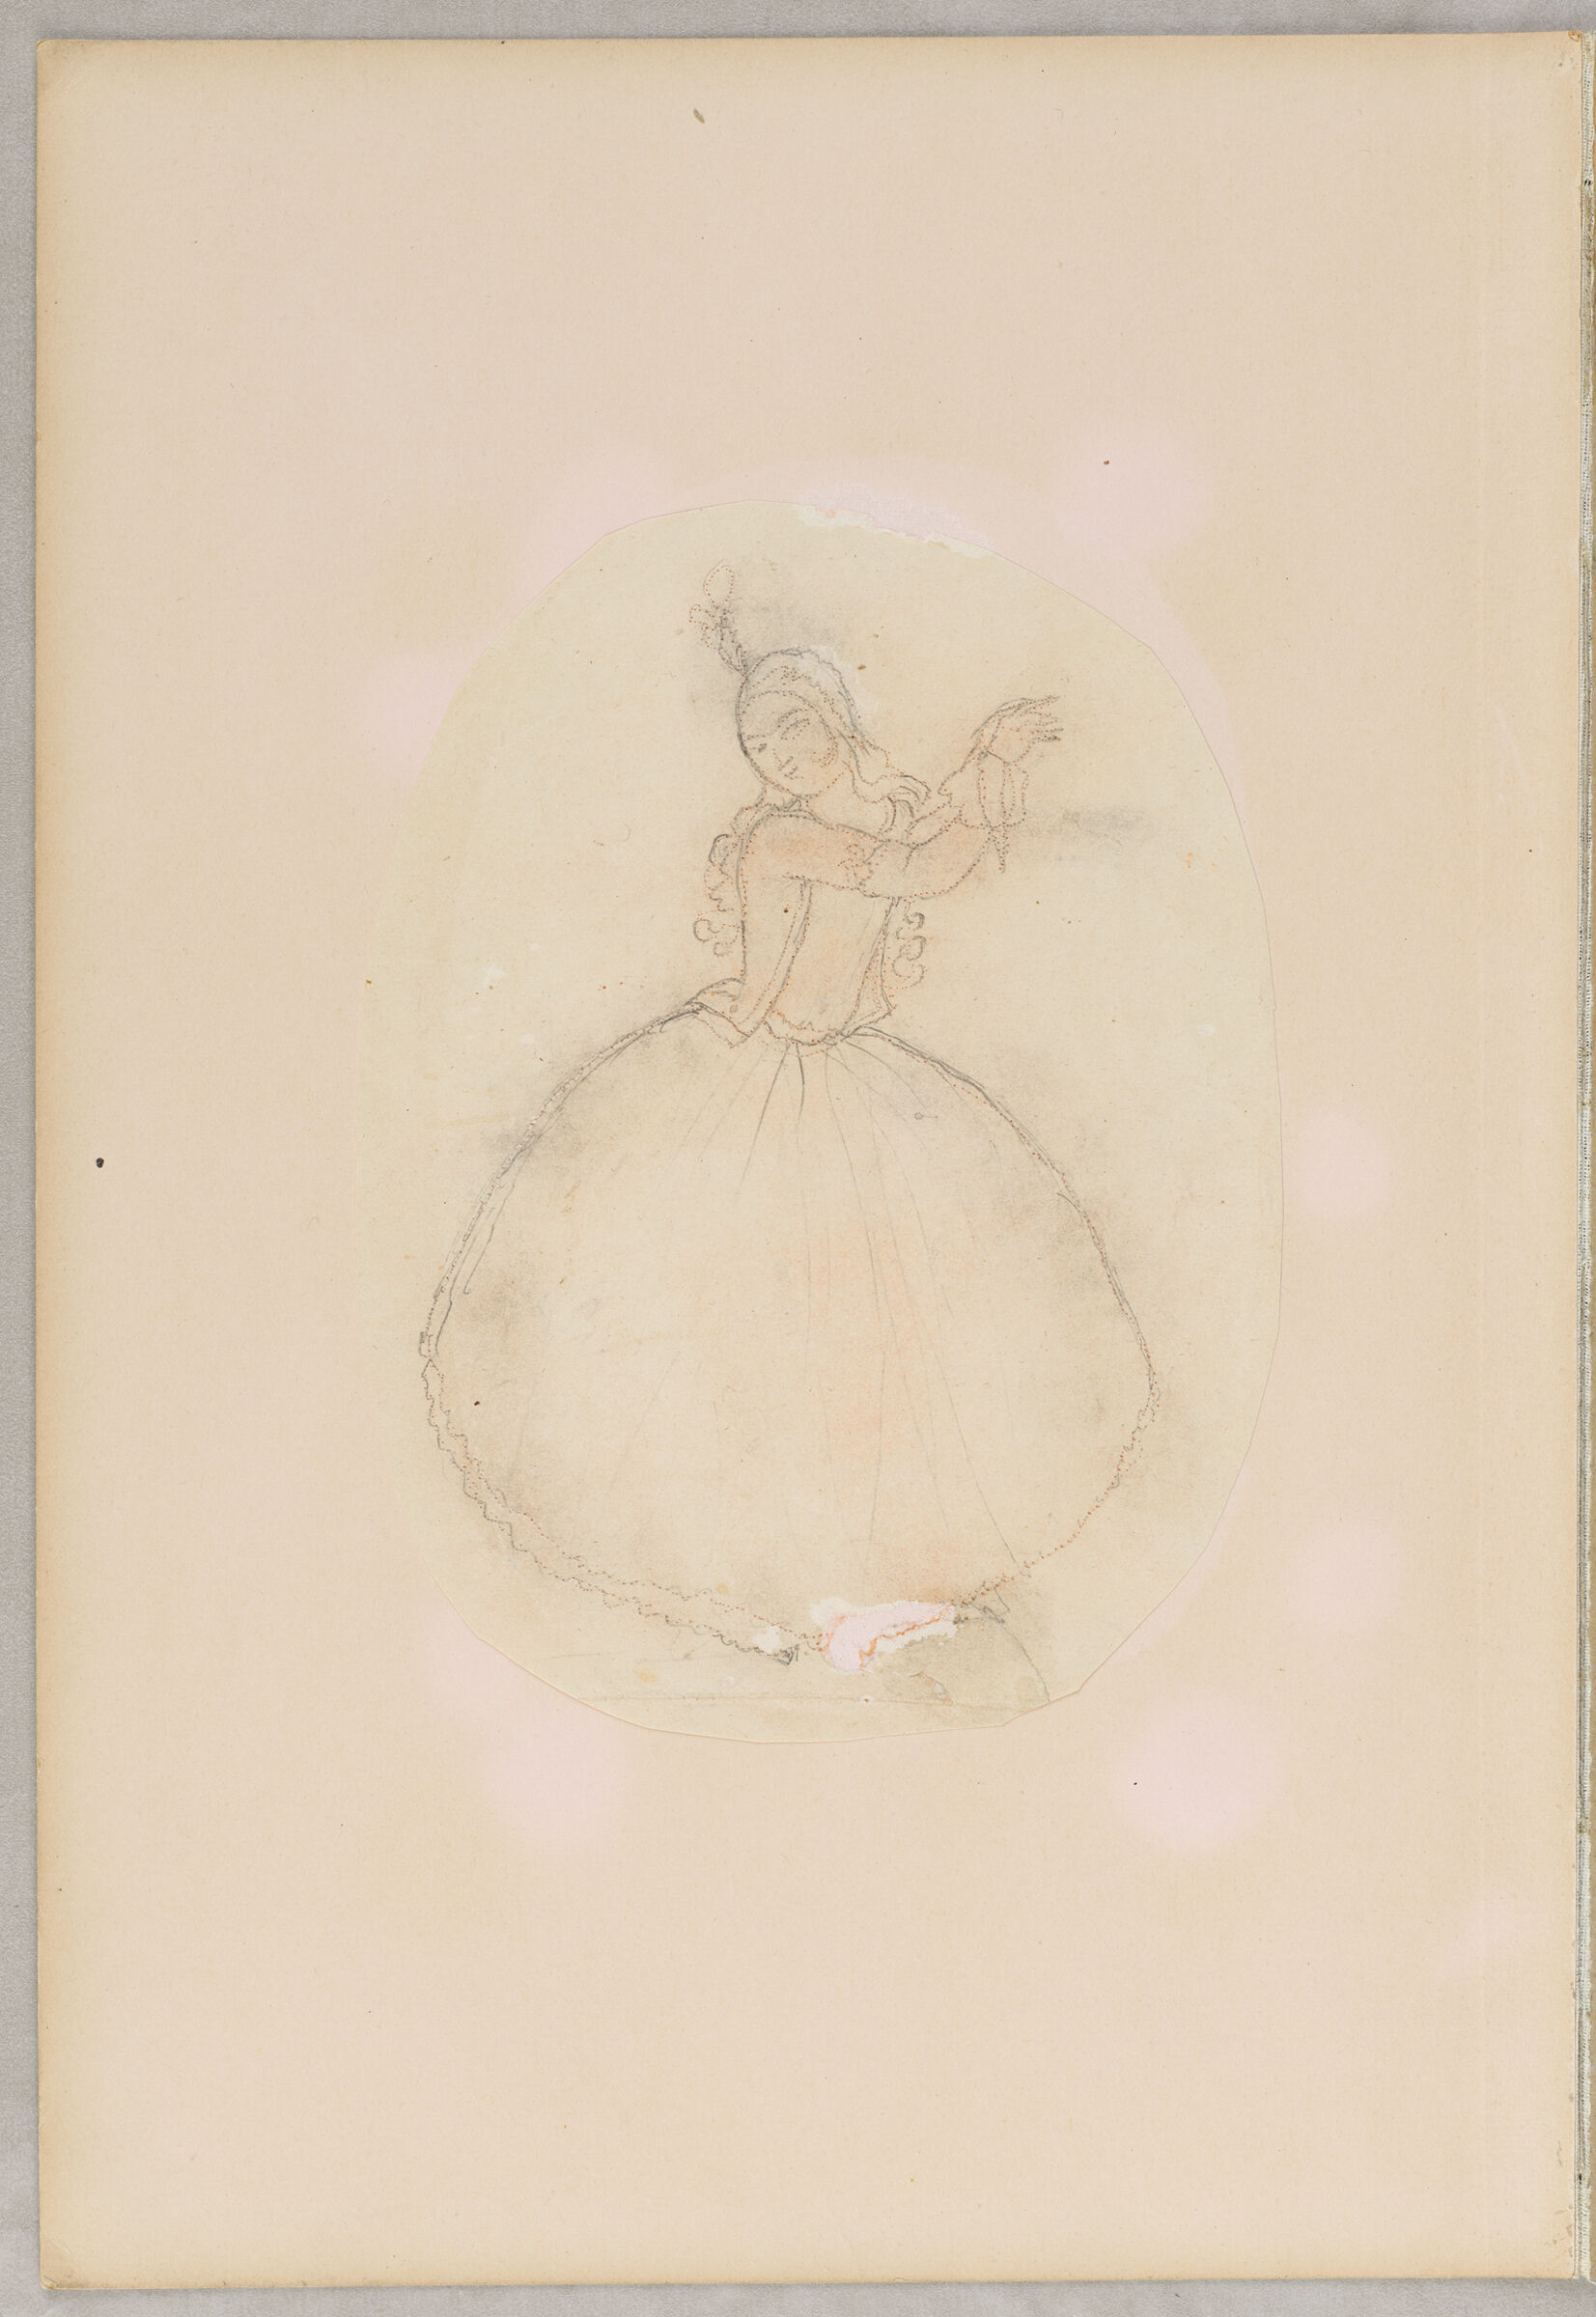 Folio 8 From An Album Of Drawings And Paintings: Dancer (Recto); Standing Youth With Waterpipe (Verso)